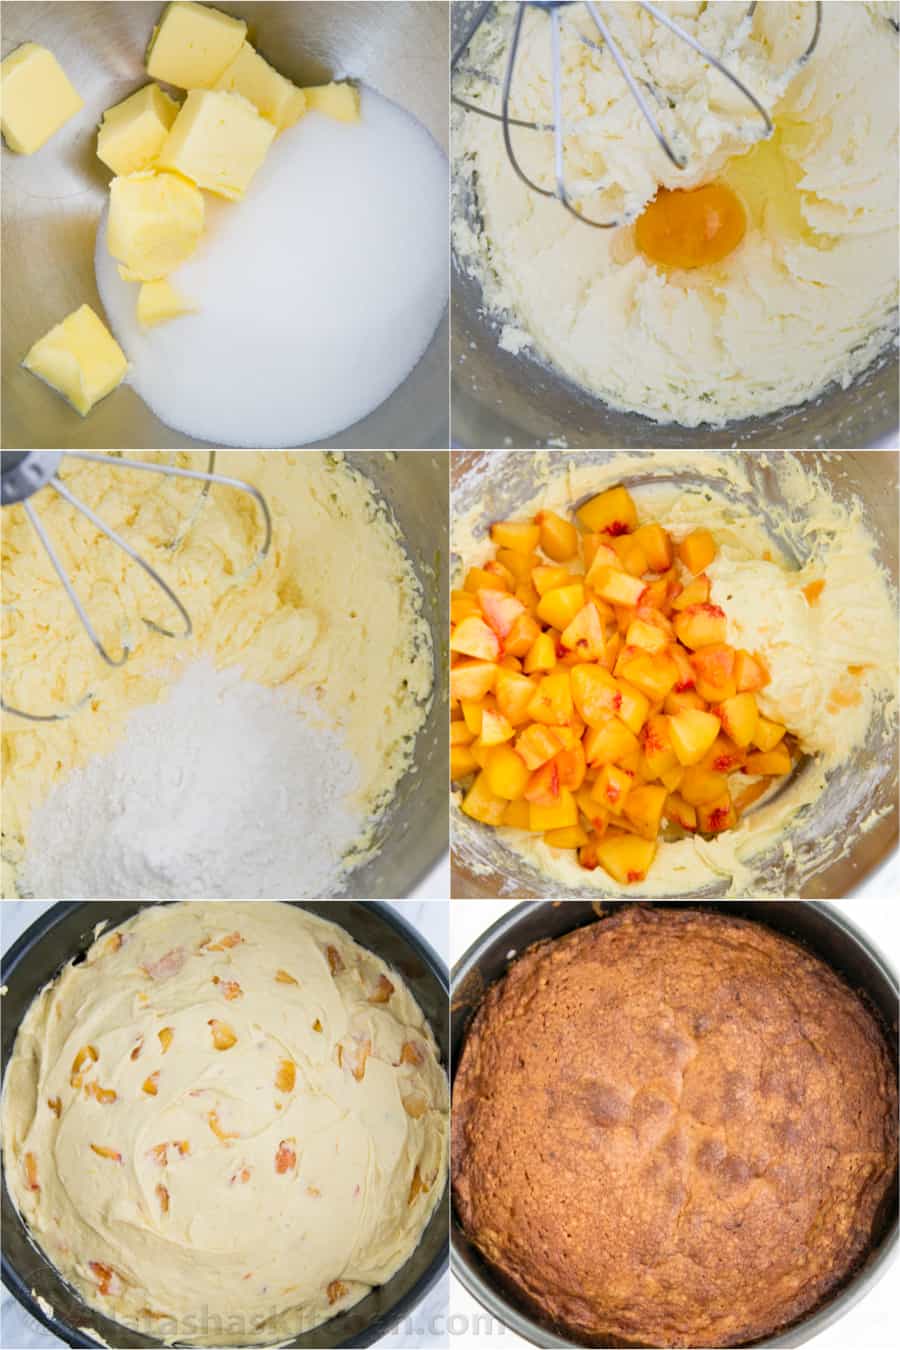 How to make an easy peach cake step by step instructions